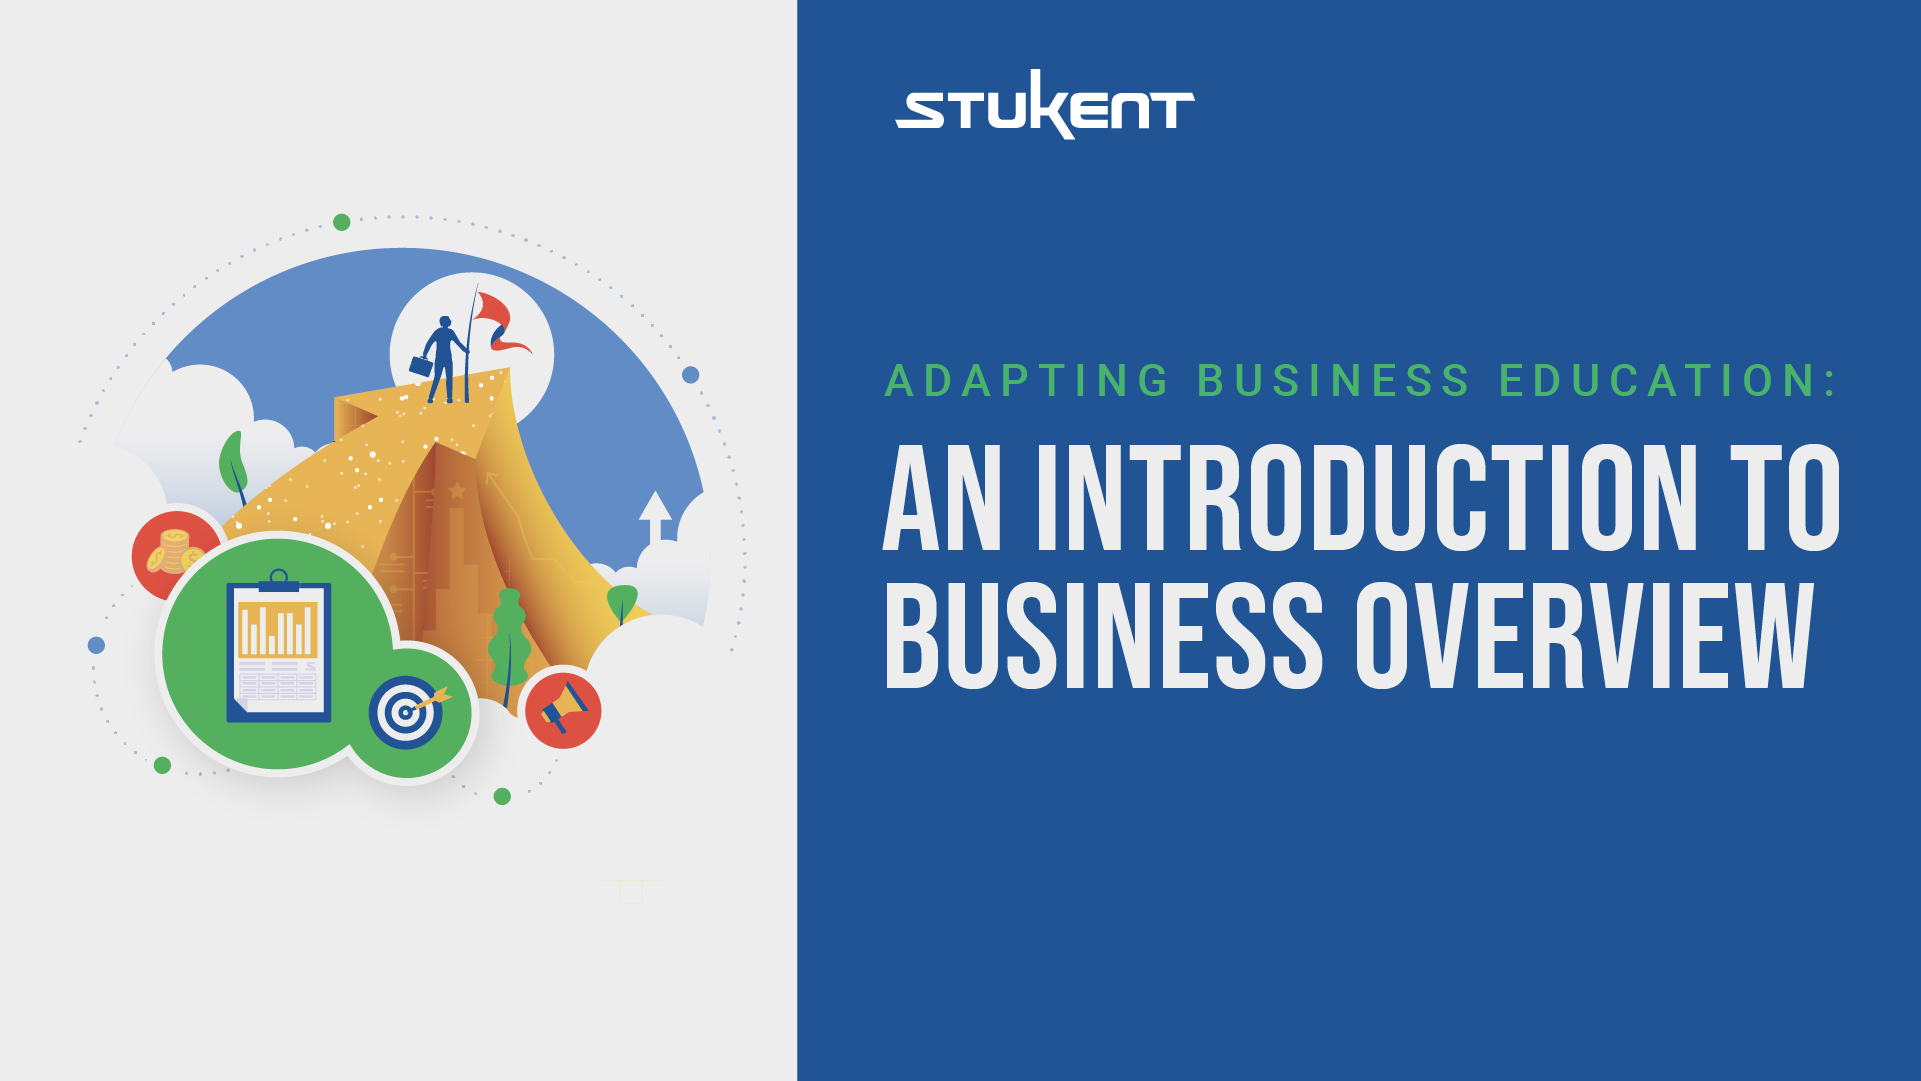 Adapting Business Education: And Introduction to Business Overview